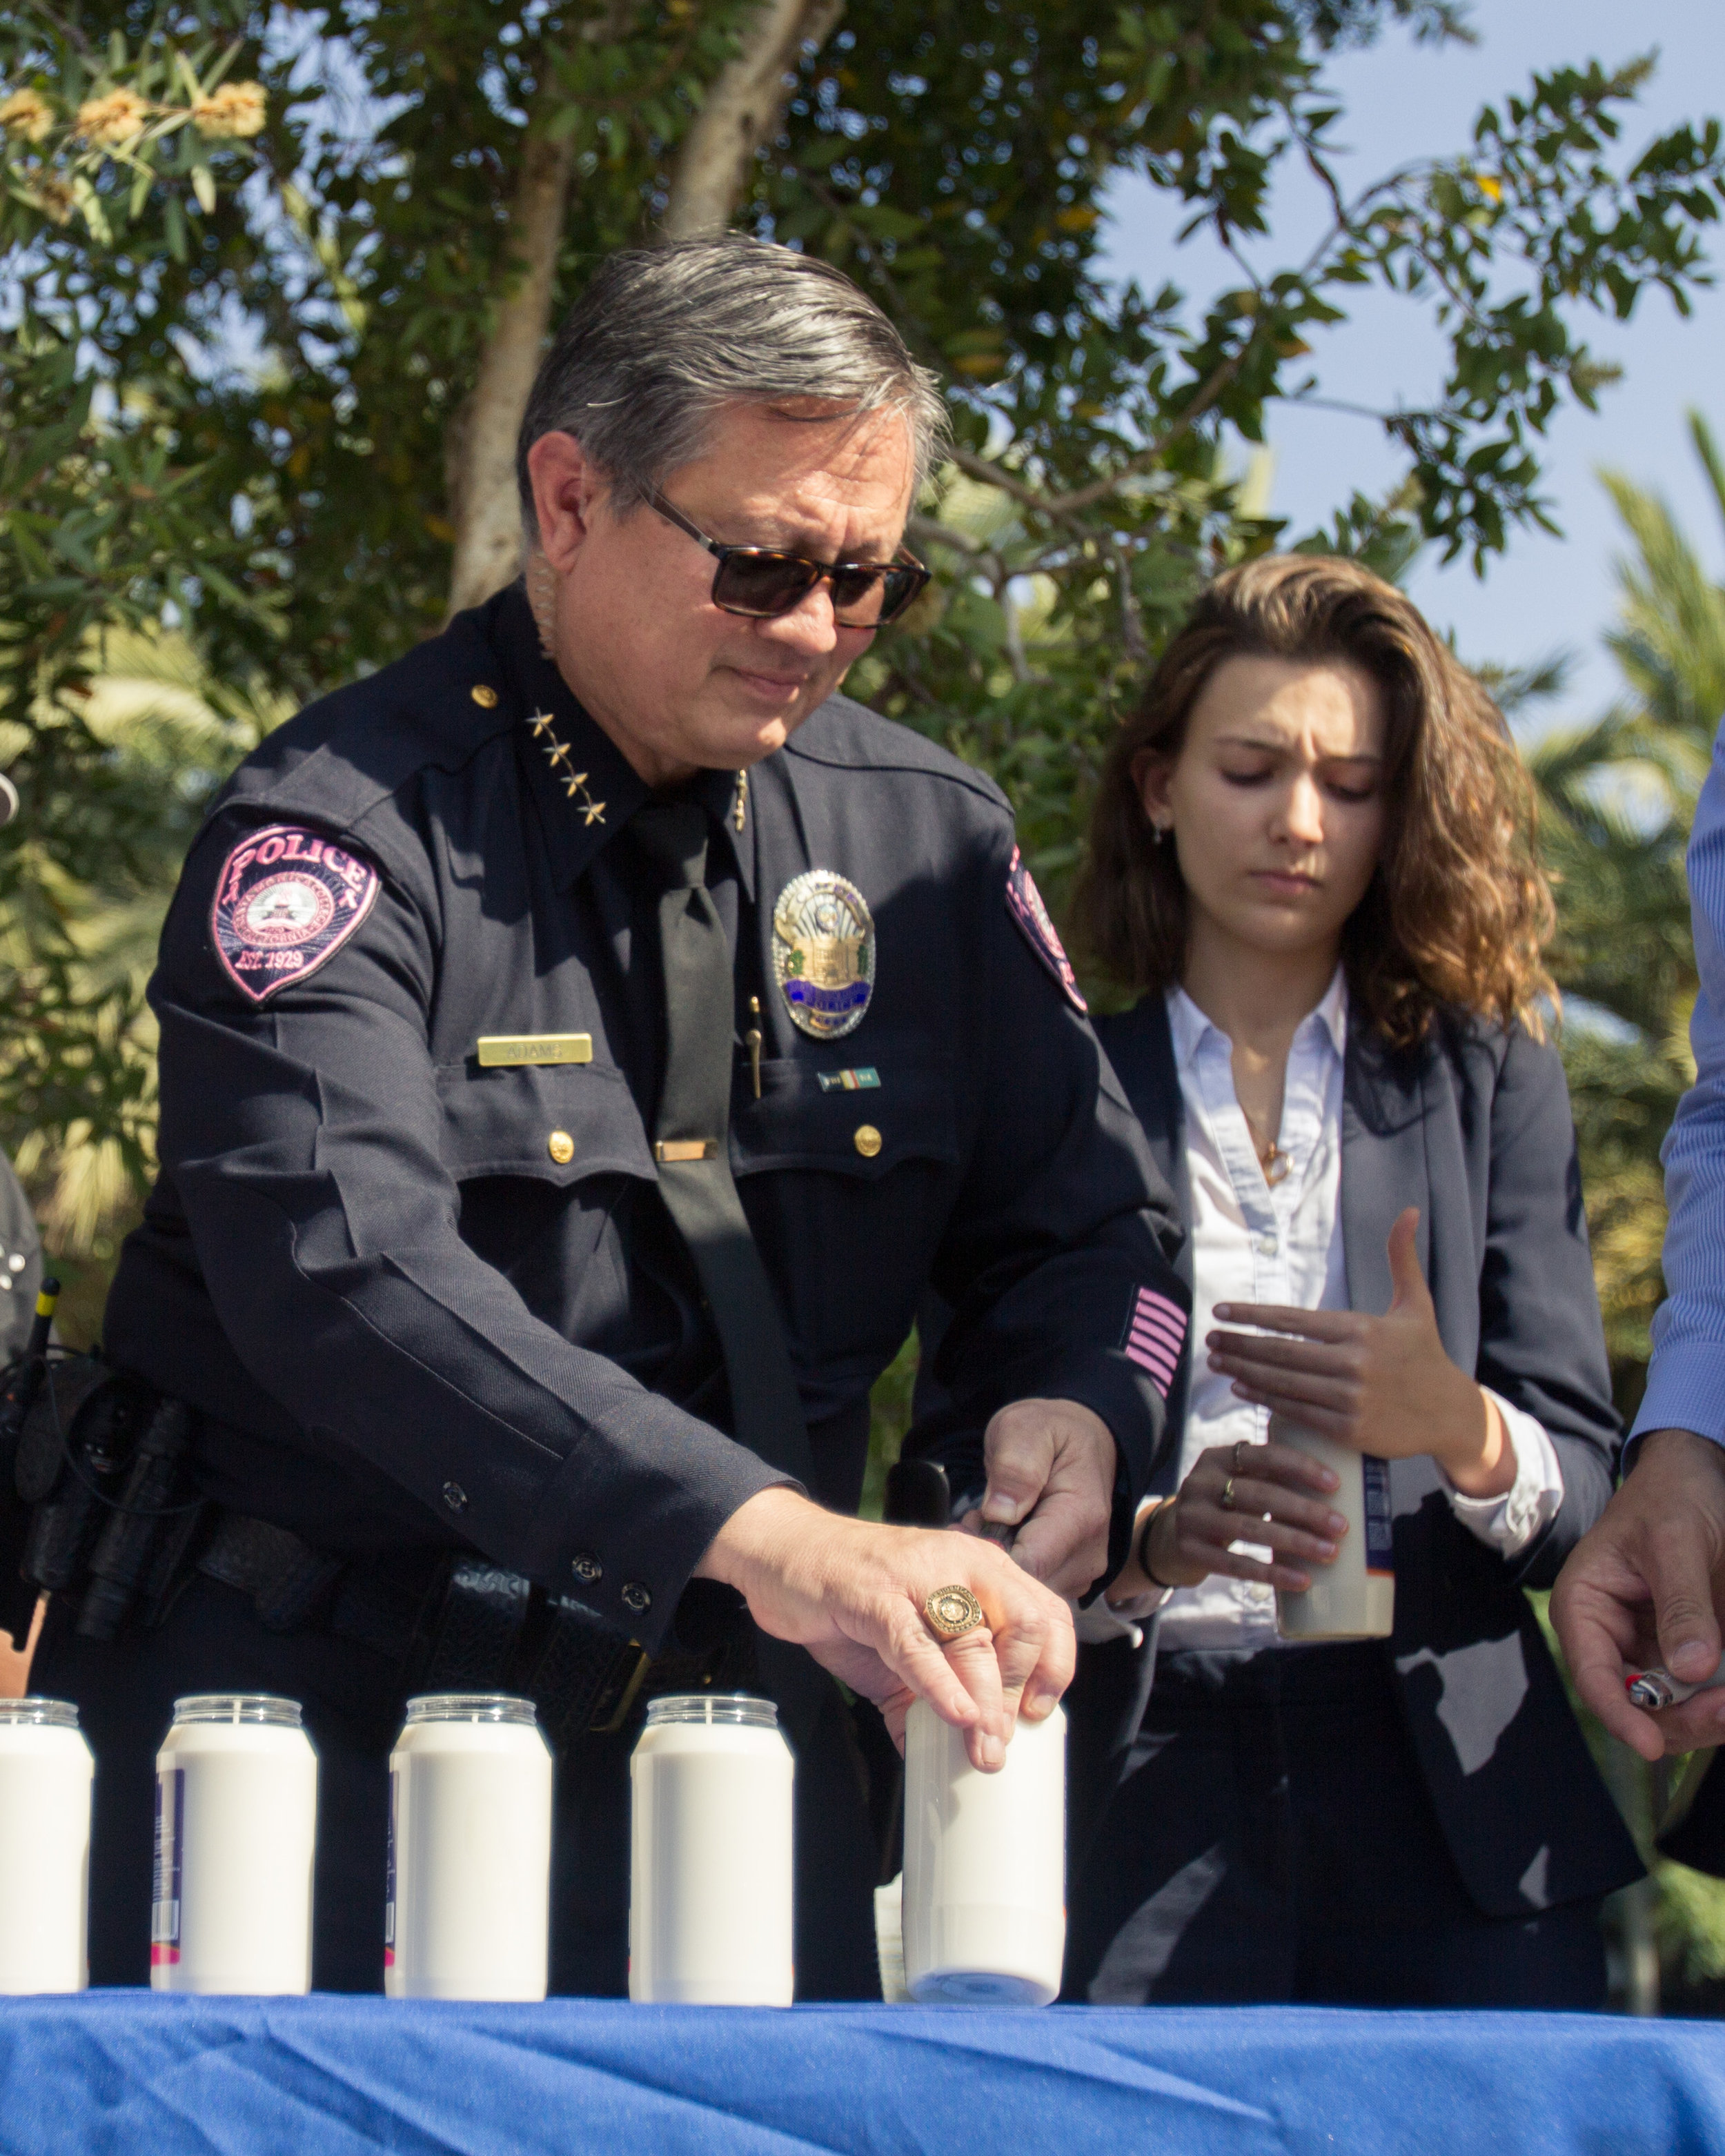  Chief of Police, Johnnie Adams (Left) lights his candle in honor of the Pittsburgh Synagogue shooting victims for the Vigil held at the Quad area in Santa Monica College in Santa Monica, California on Tuesday October 30th 2018. 